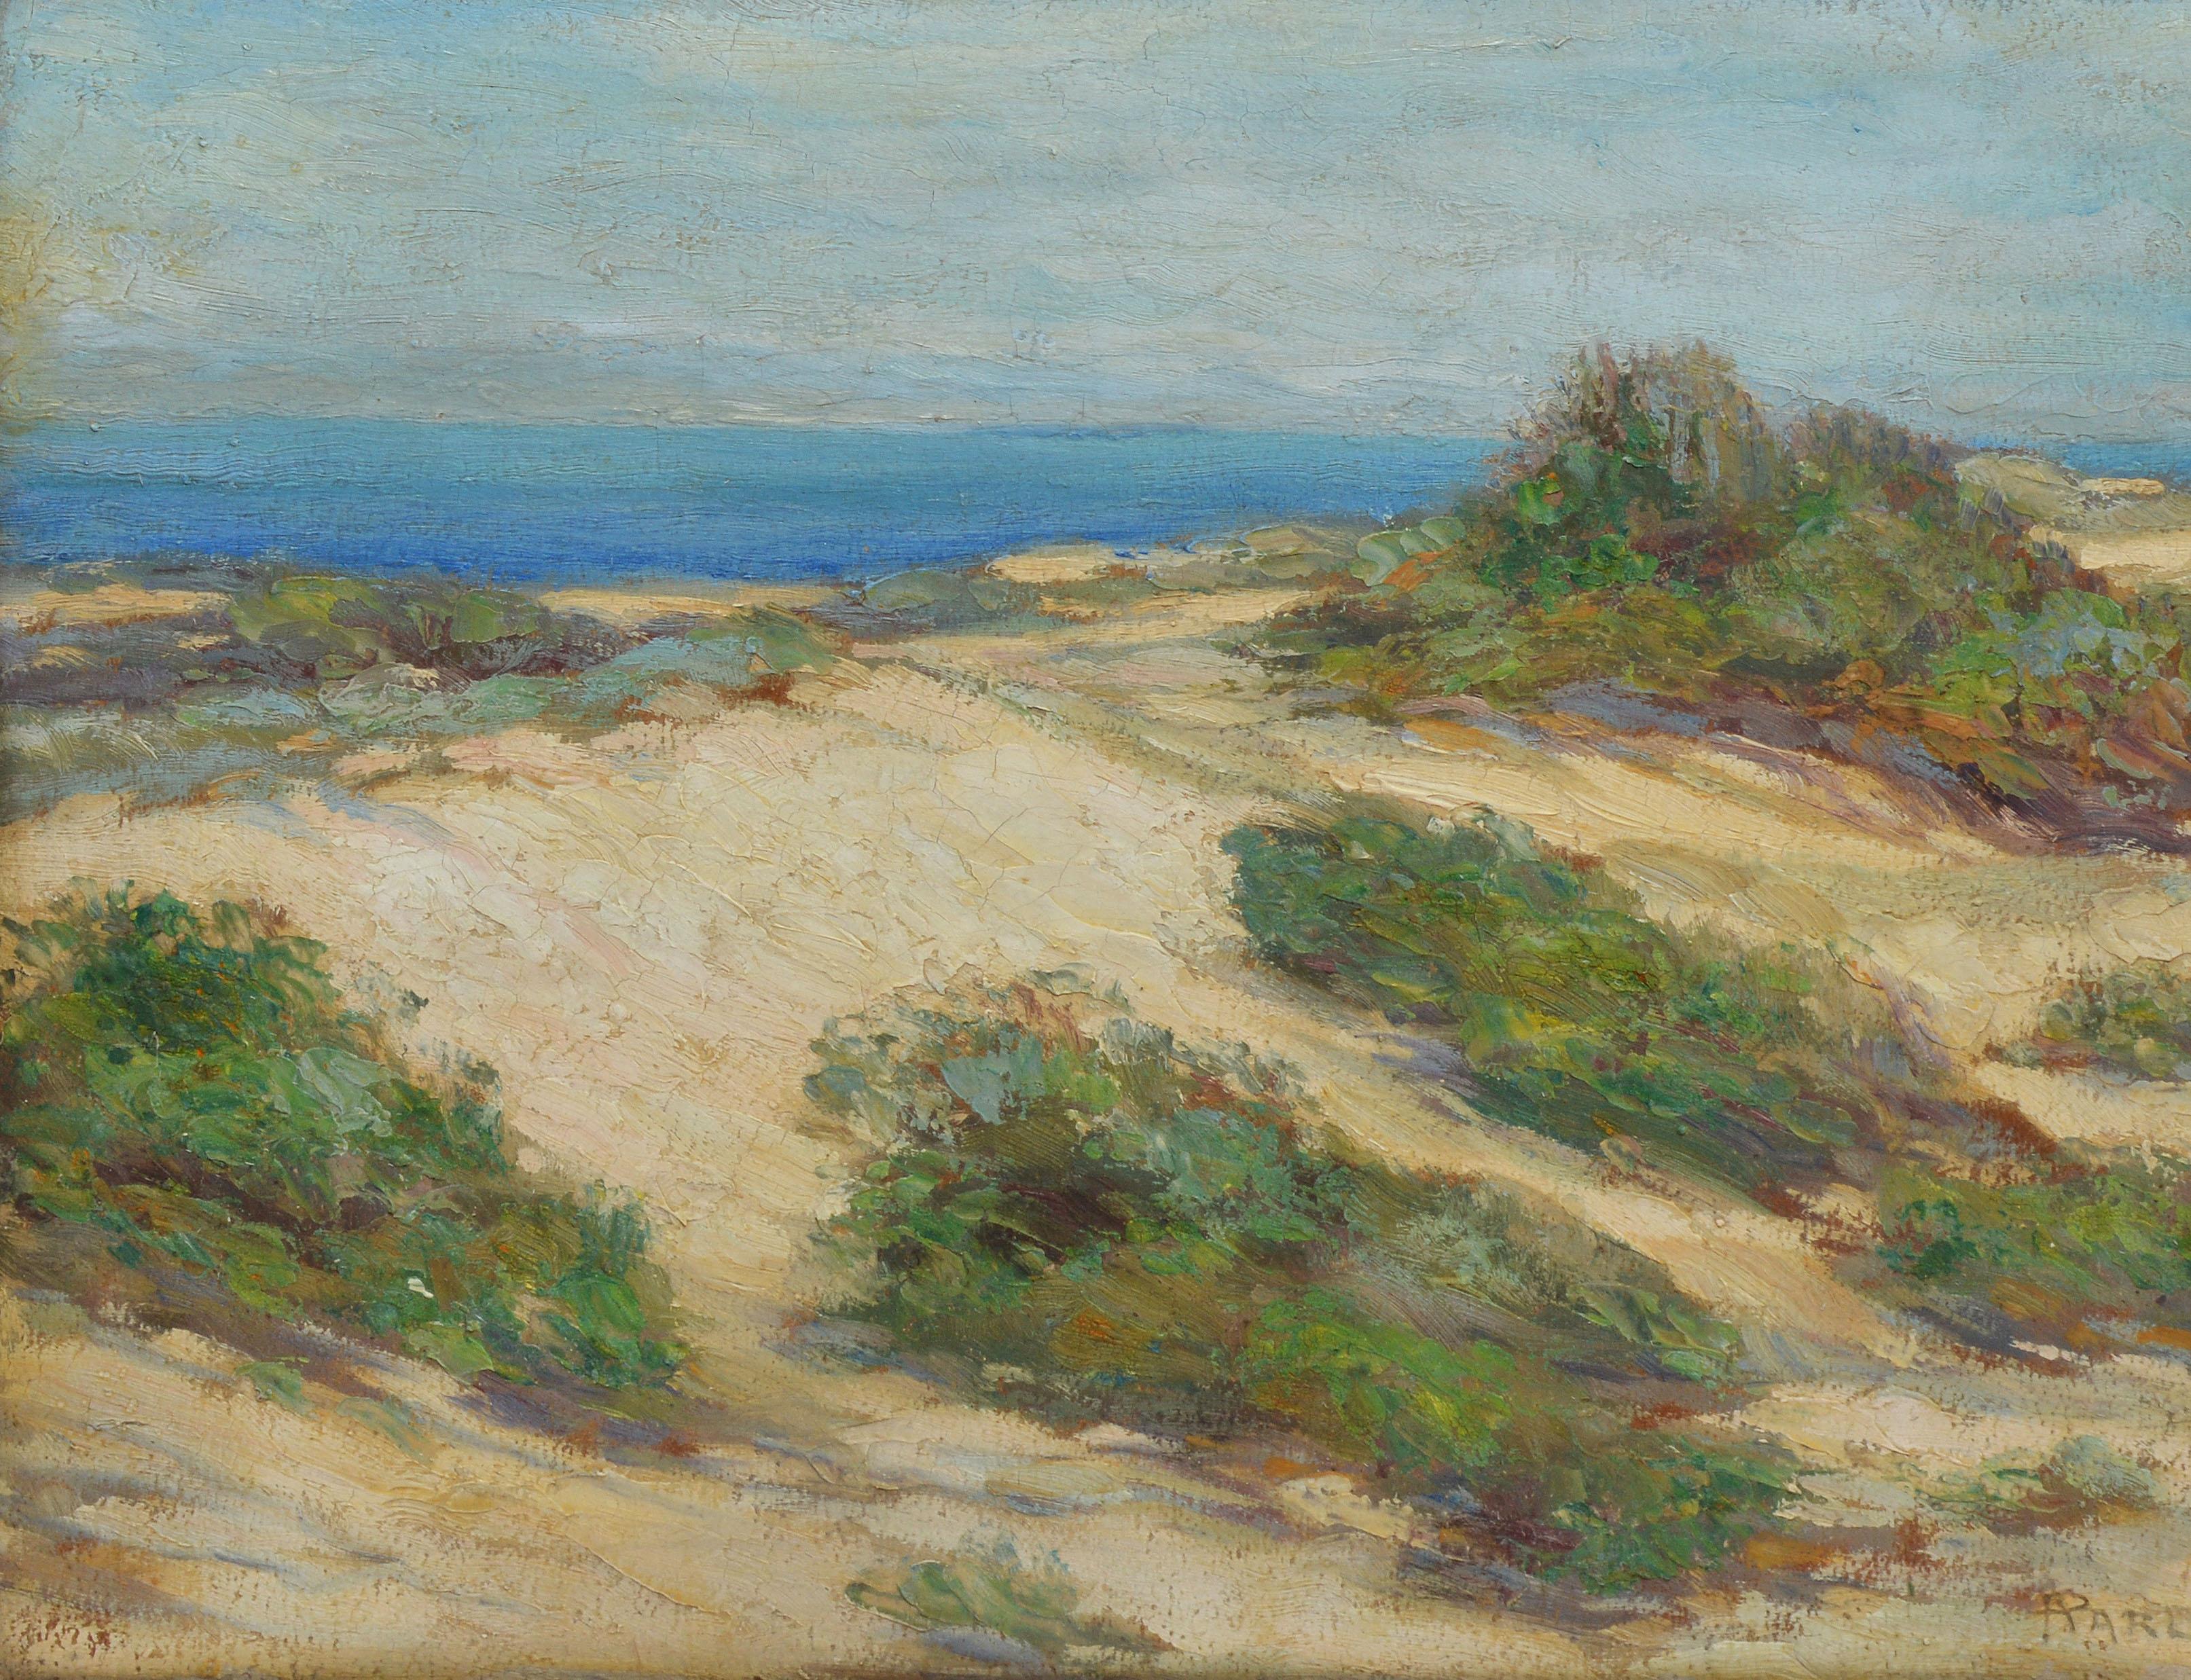 Impressionist view of beach dunes.  Oil on board, circa 1935.  Signed lower right.  Displayed in a giltwood frame.  Image size, 16